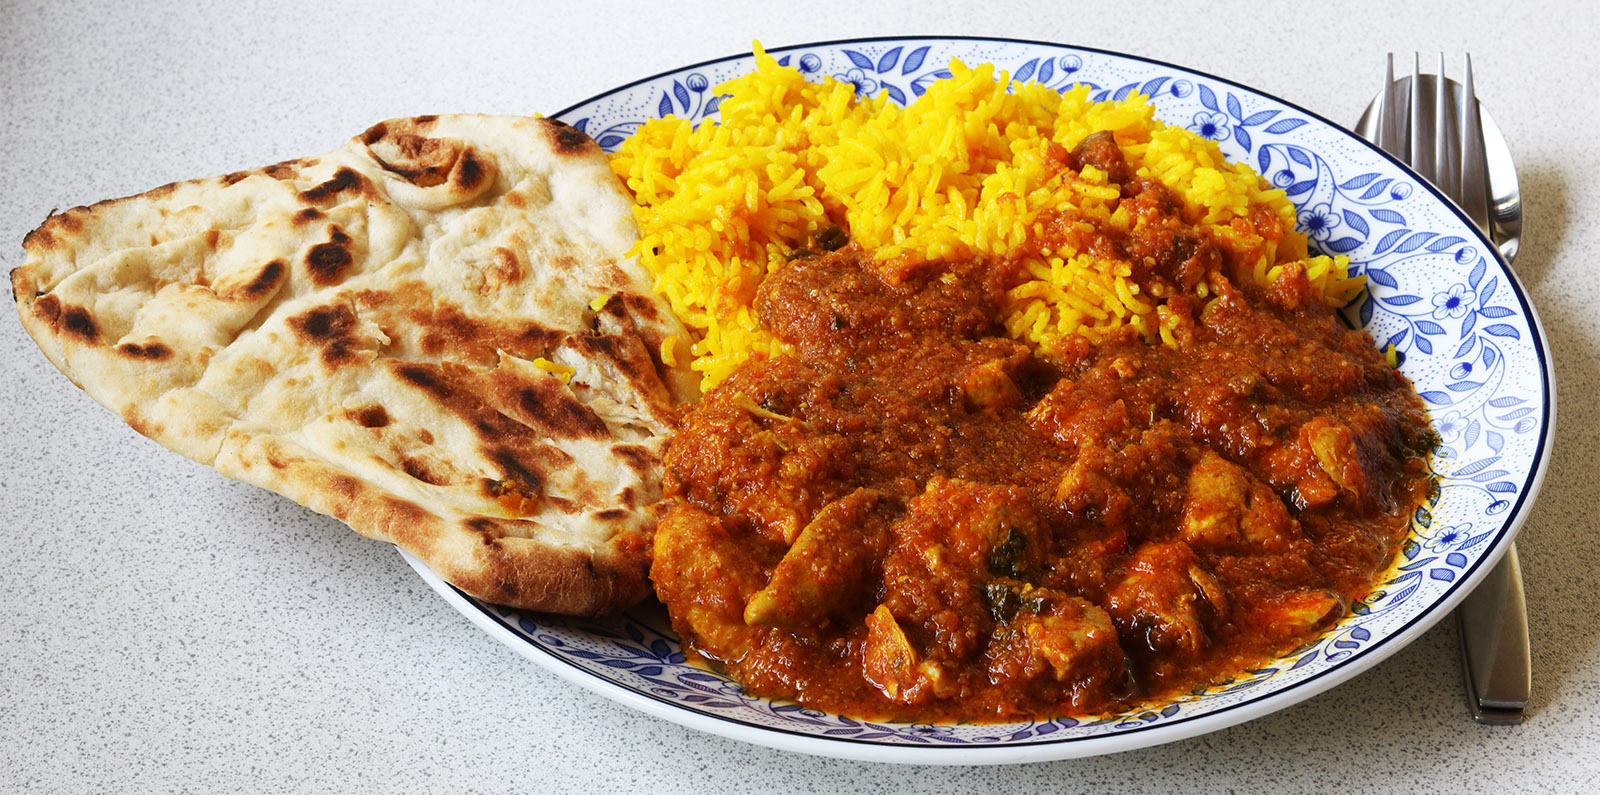 Rice and naan s.jpg